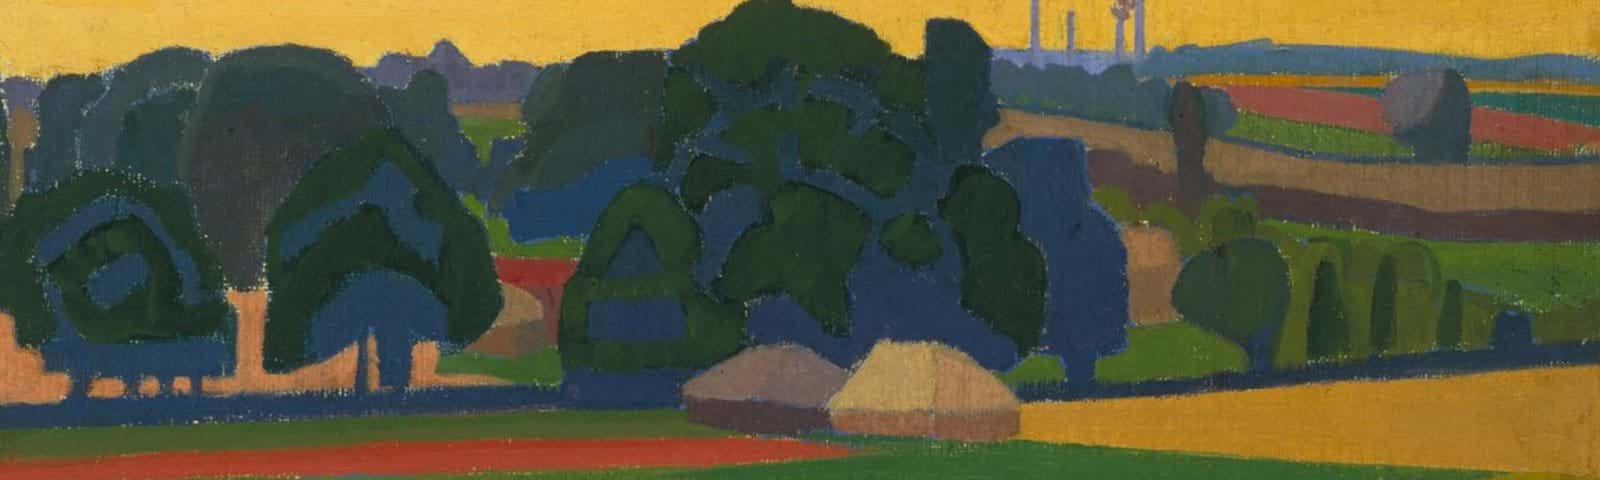 5 Spencer Gore The Beanfield Letchworth 1912 Tate